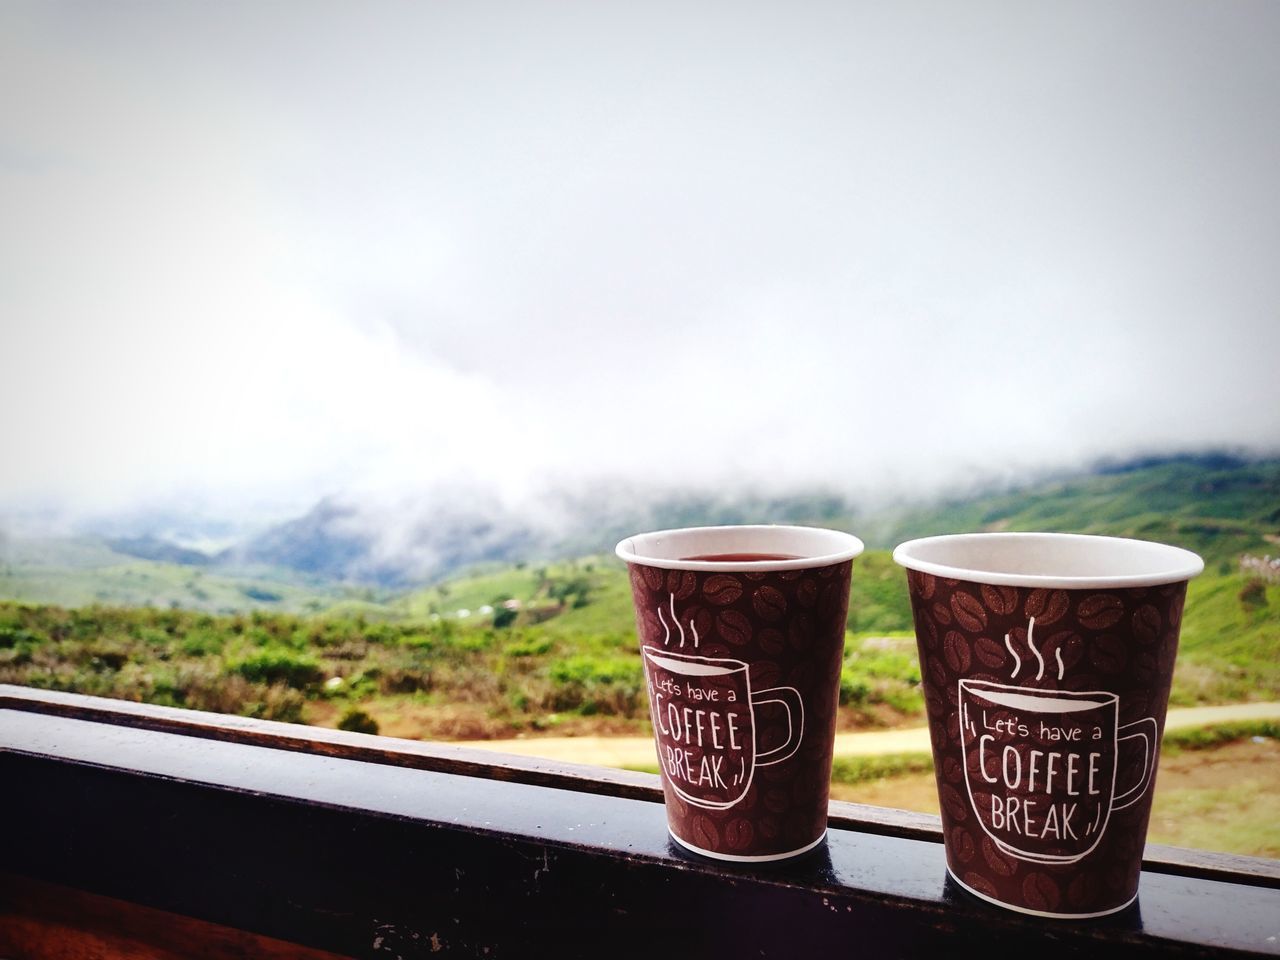 morning, food and drink, drink, refreshment, cup, soft drink, nature, no people, sky, day, mug, coffee, fog, hot drink, copy space, food, outdoors, green, environment, window, landscape, mountain, tea, cloud